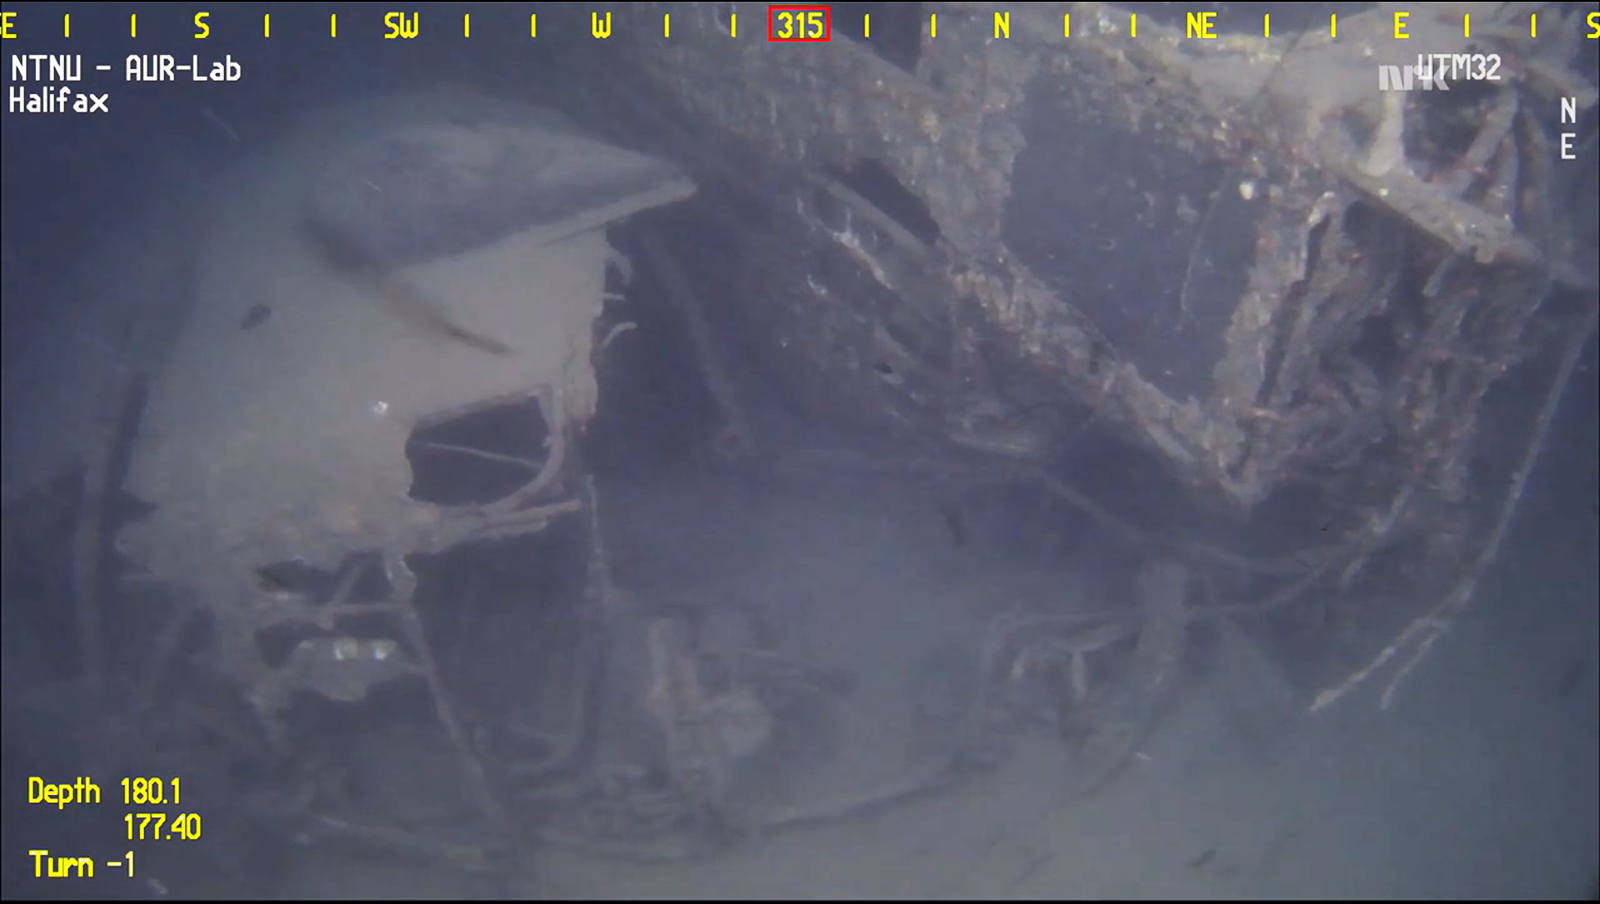 The Halifax's forward fuselage torn from the aircraft, lies on its left side beside the cockpit. (screen capture of video fromNTNU AUR-LAB)